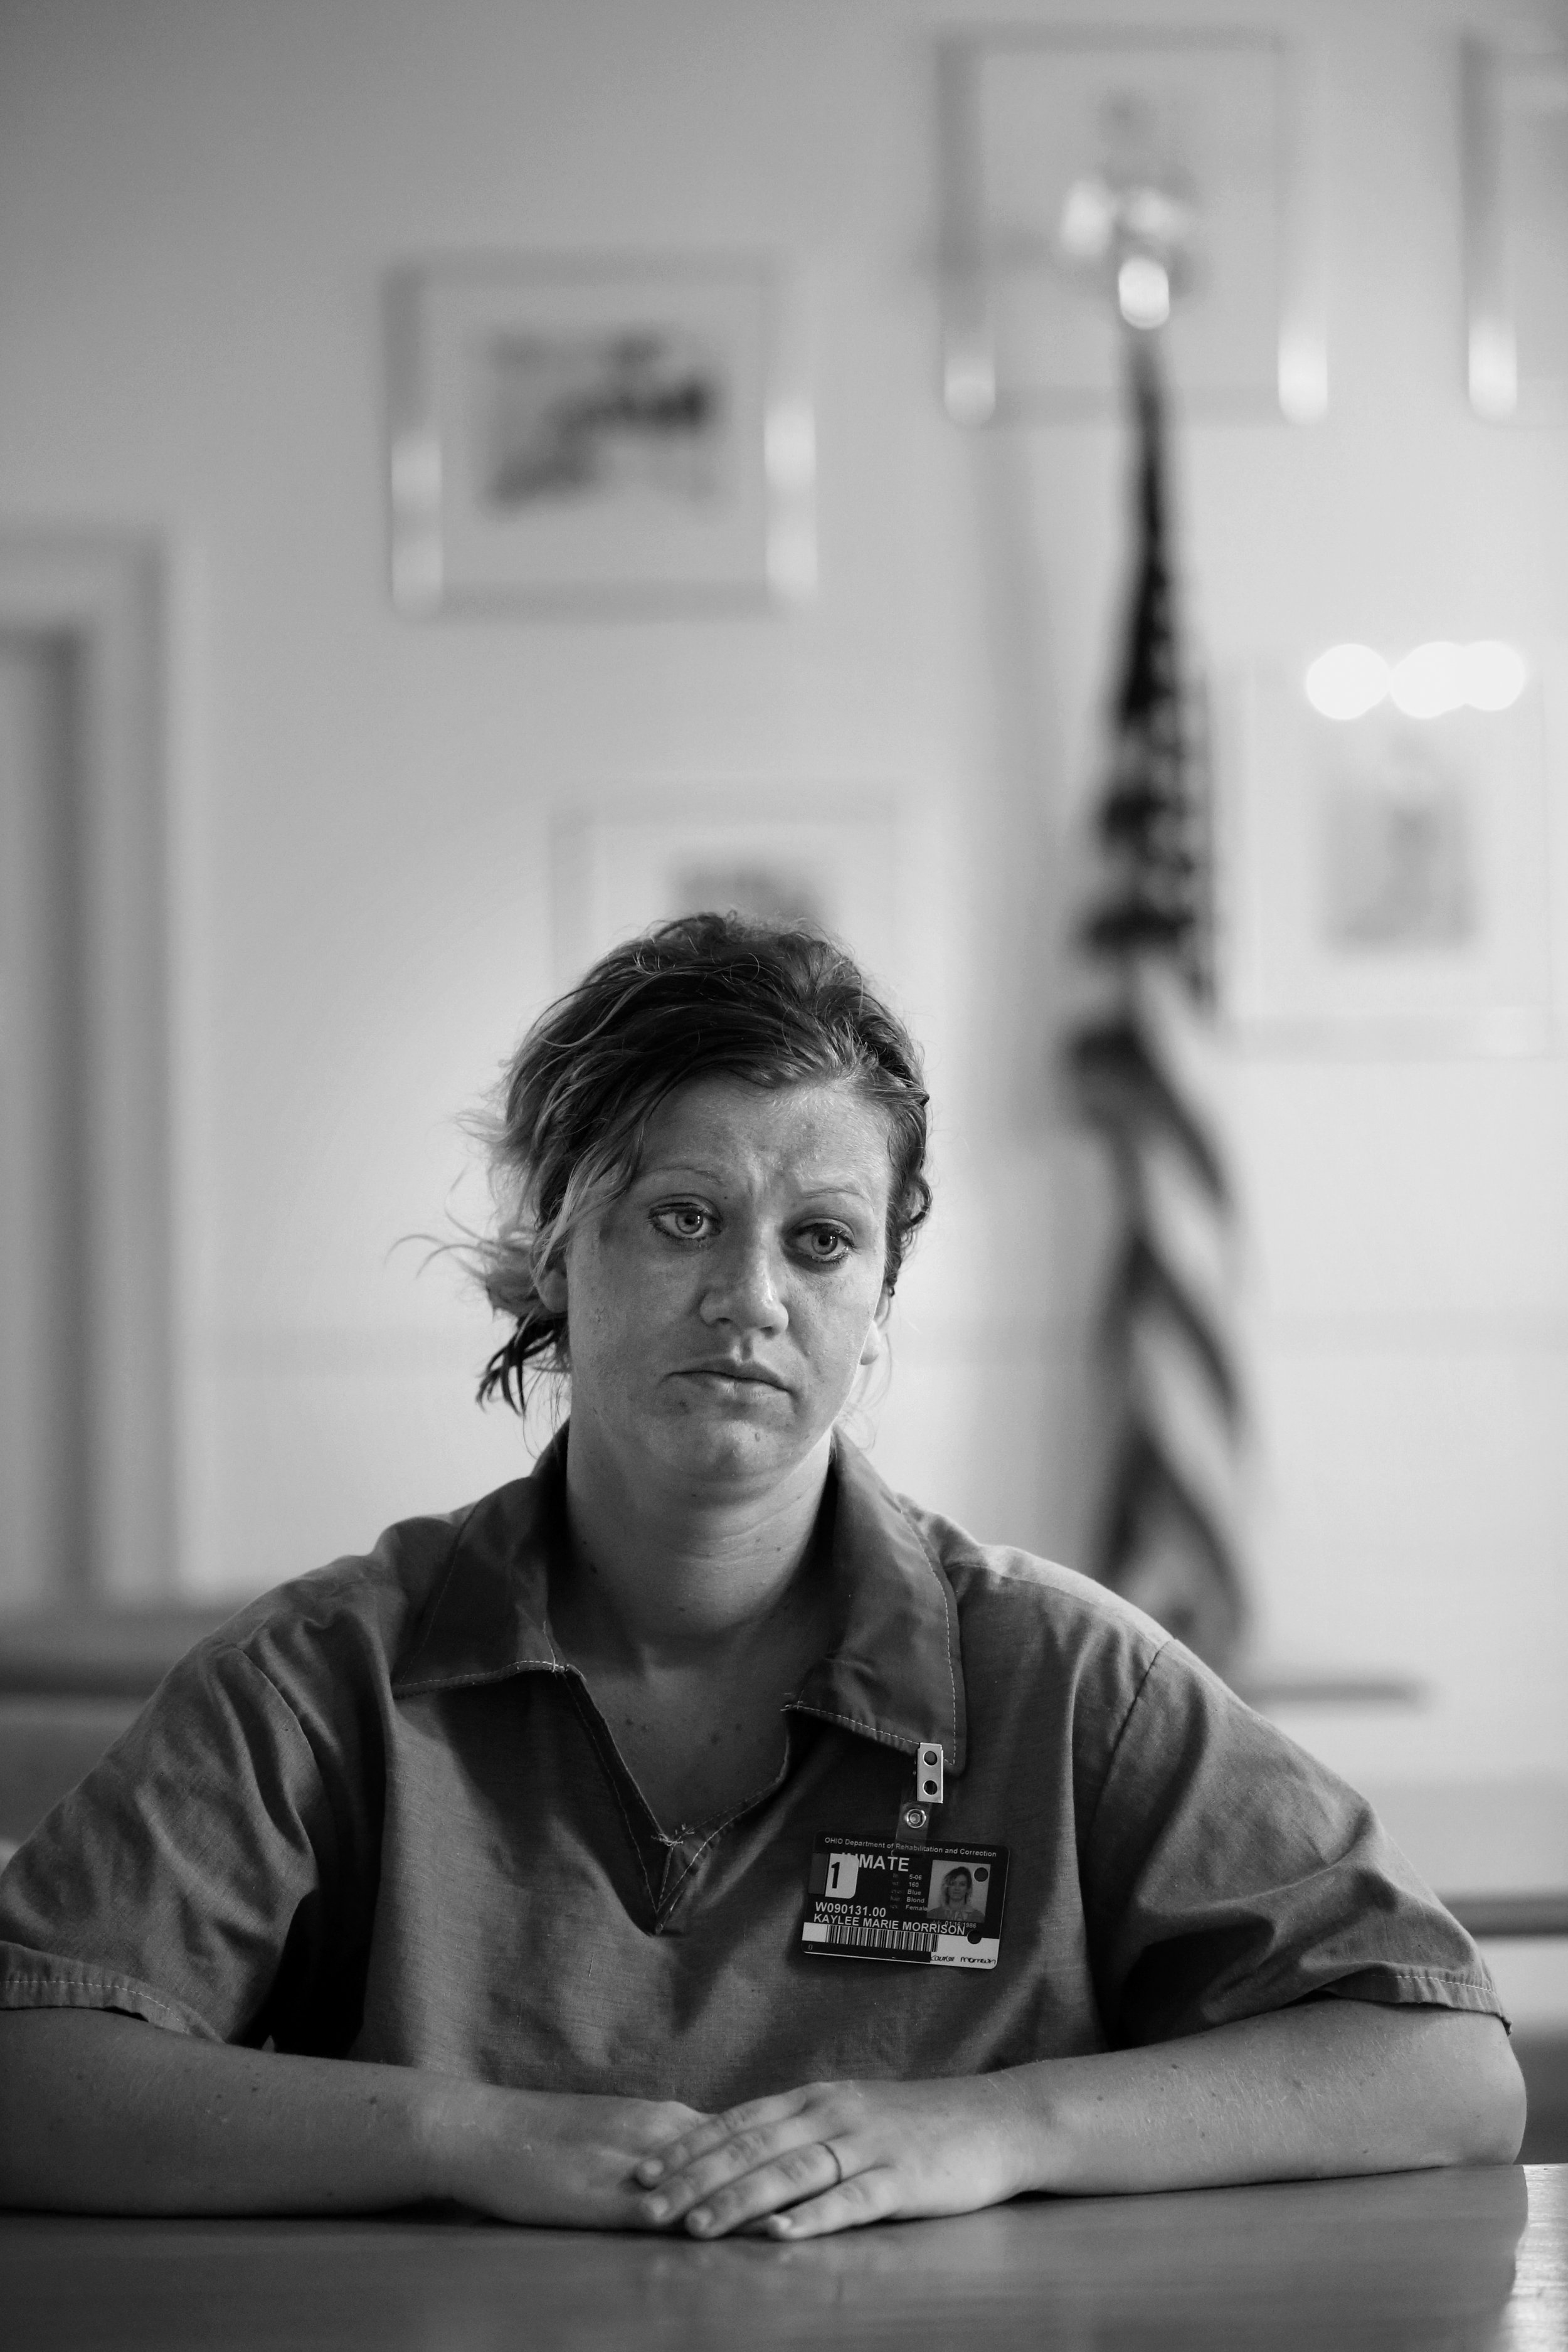  Kaylee Morrison is beginning a four-year-long sentence at the Ohio Reformatory for Women in Marysville, Ohio, pictured on Aug. 25, 2014. Morrison, who is an opioid user, was convicted of tampering with evidence, possession of criminal tools and poss